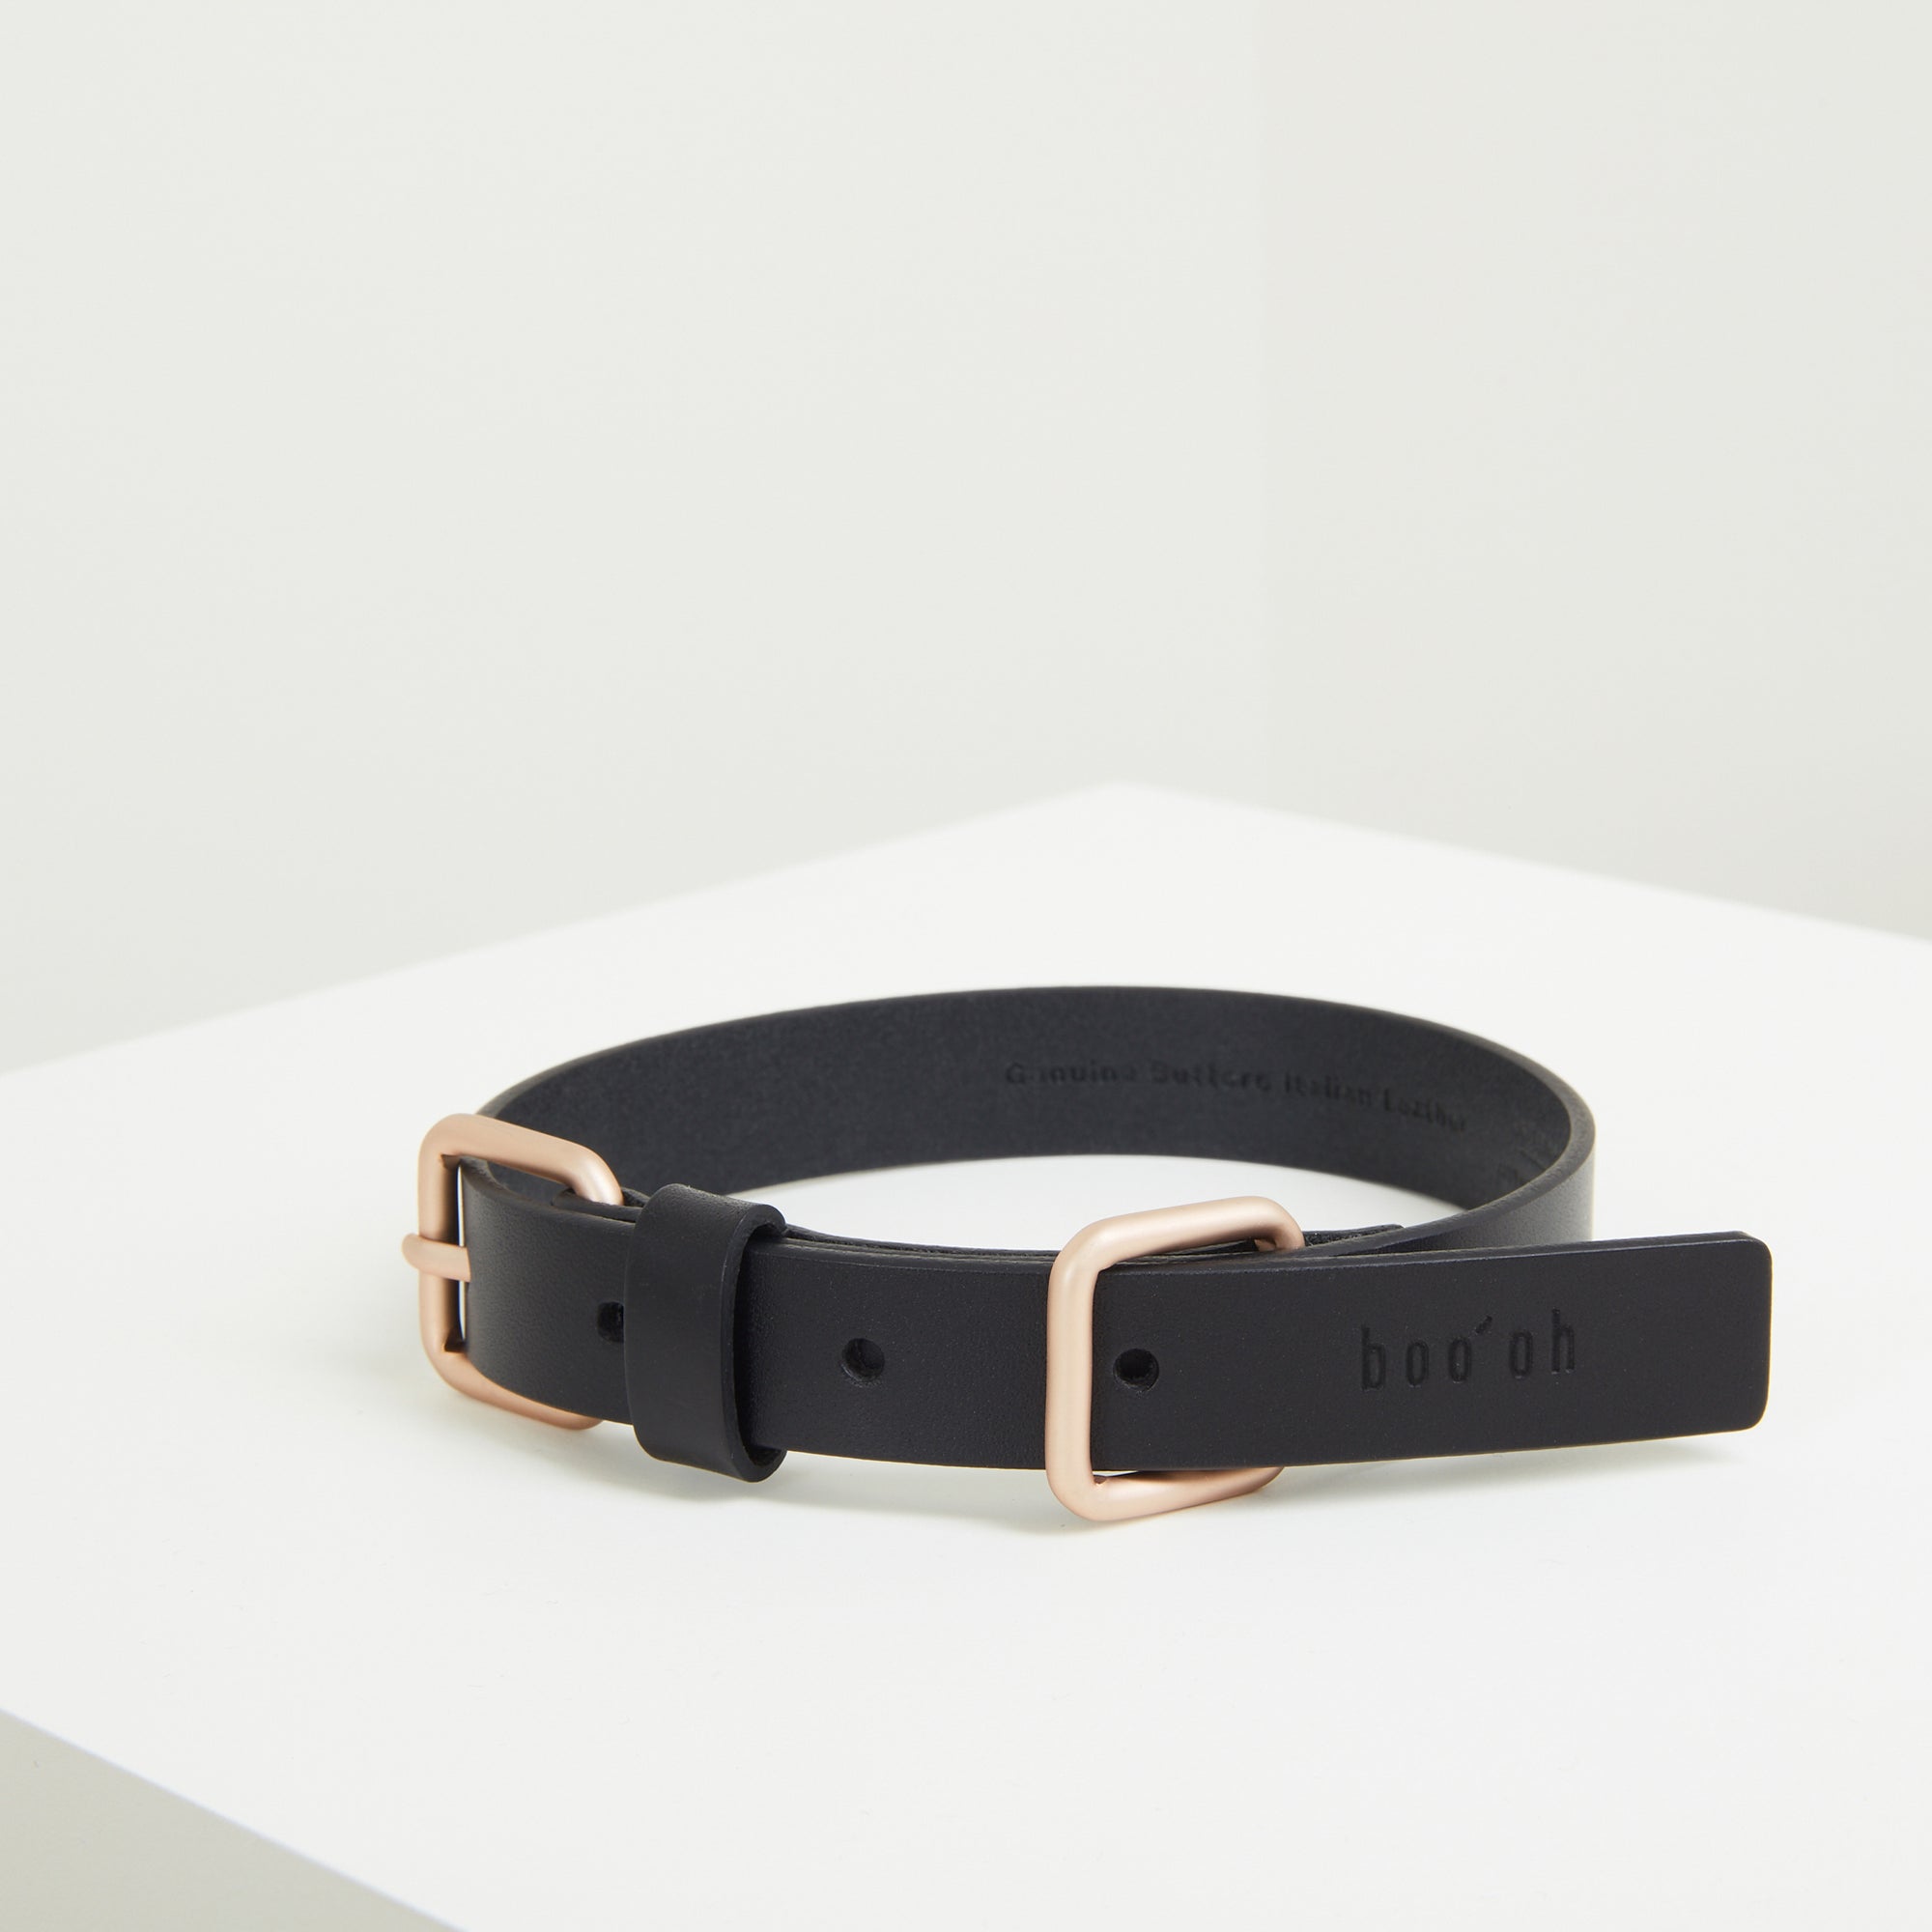 Lumi collar by Boo Oh in black + gold